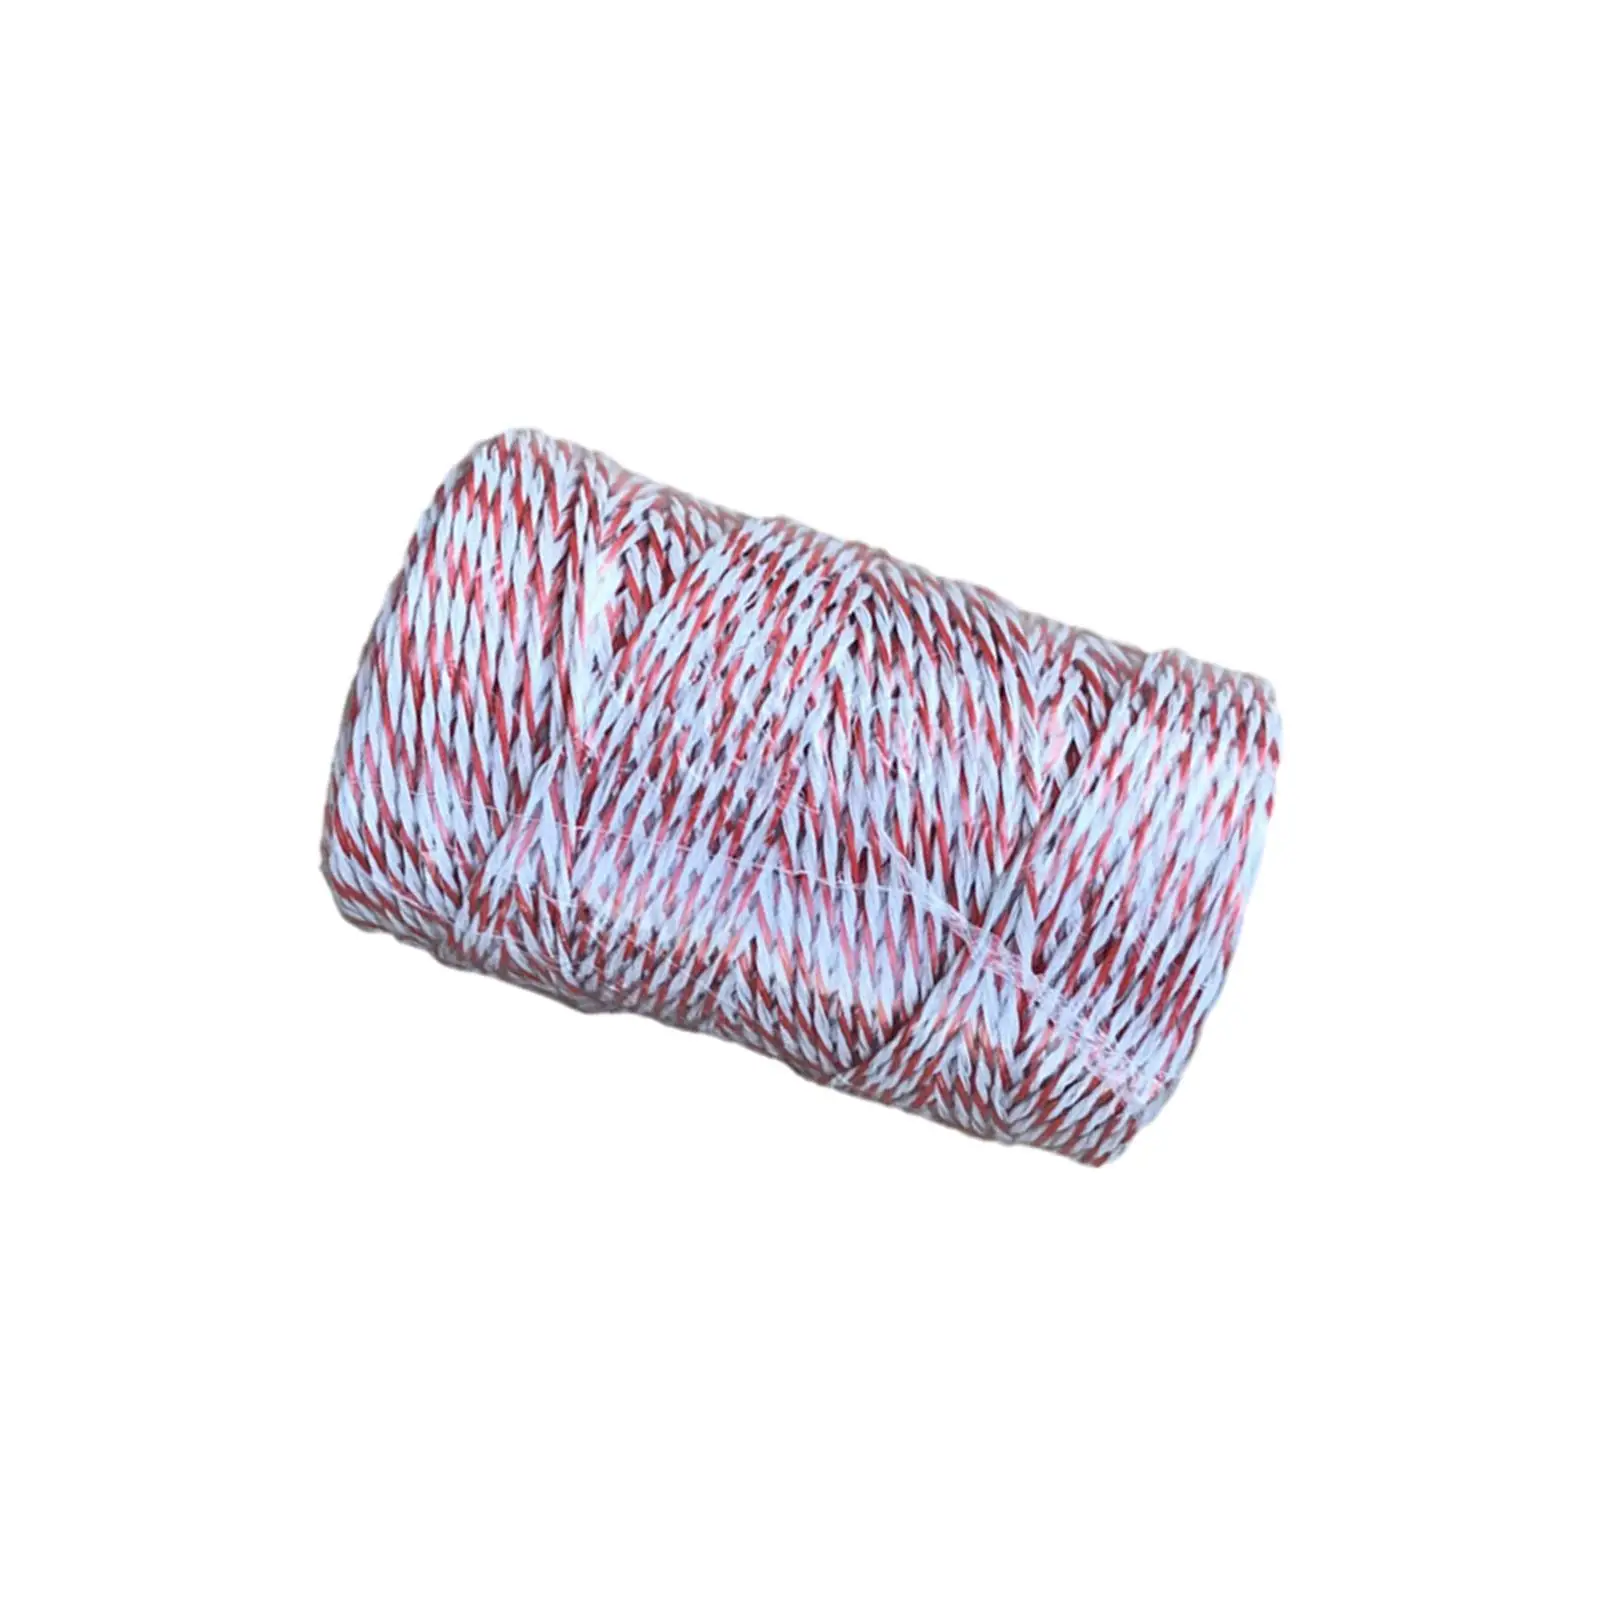 Electric Fence Rope Low Resistance 200M Fencing Portable Reliable Polyrope Polywires for Husbandry Livestock Animal Sheep Dogs